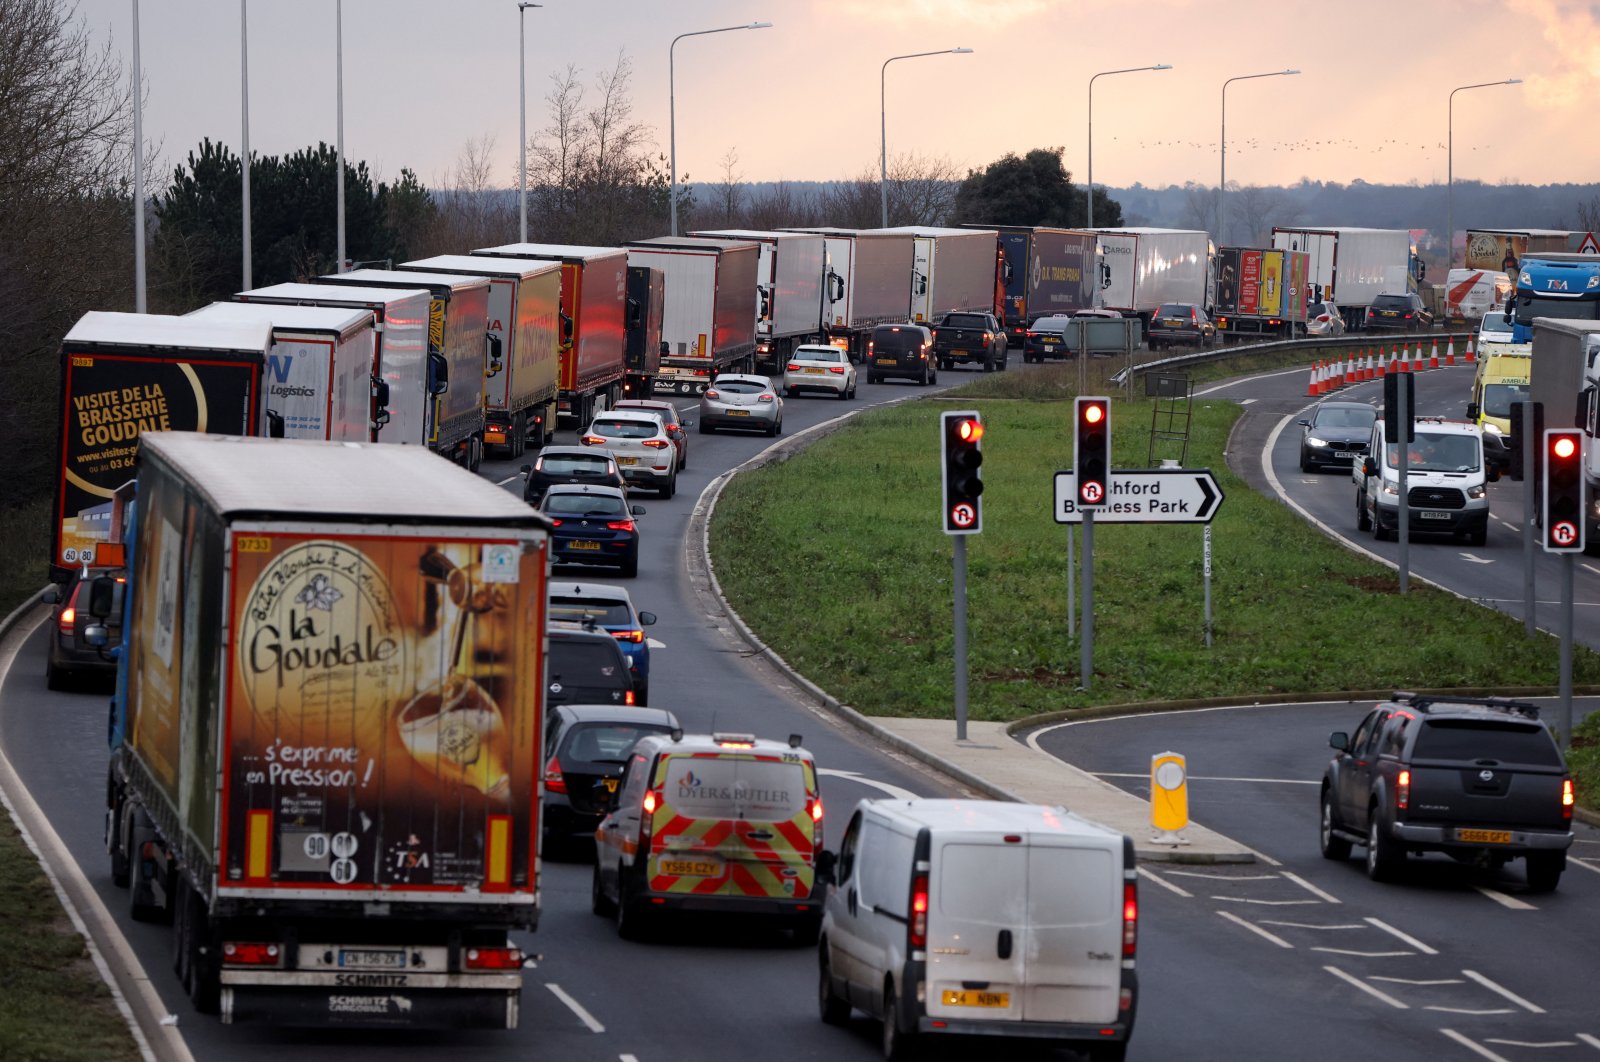 Trucks line up on the road leading to the Waterbrook Inland Border Facility, a temporary customs clearance center set up in a truck stop in Ashford, Kent, Britain, Jan. 15, 2021. (Reuters Photo)